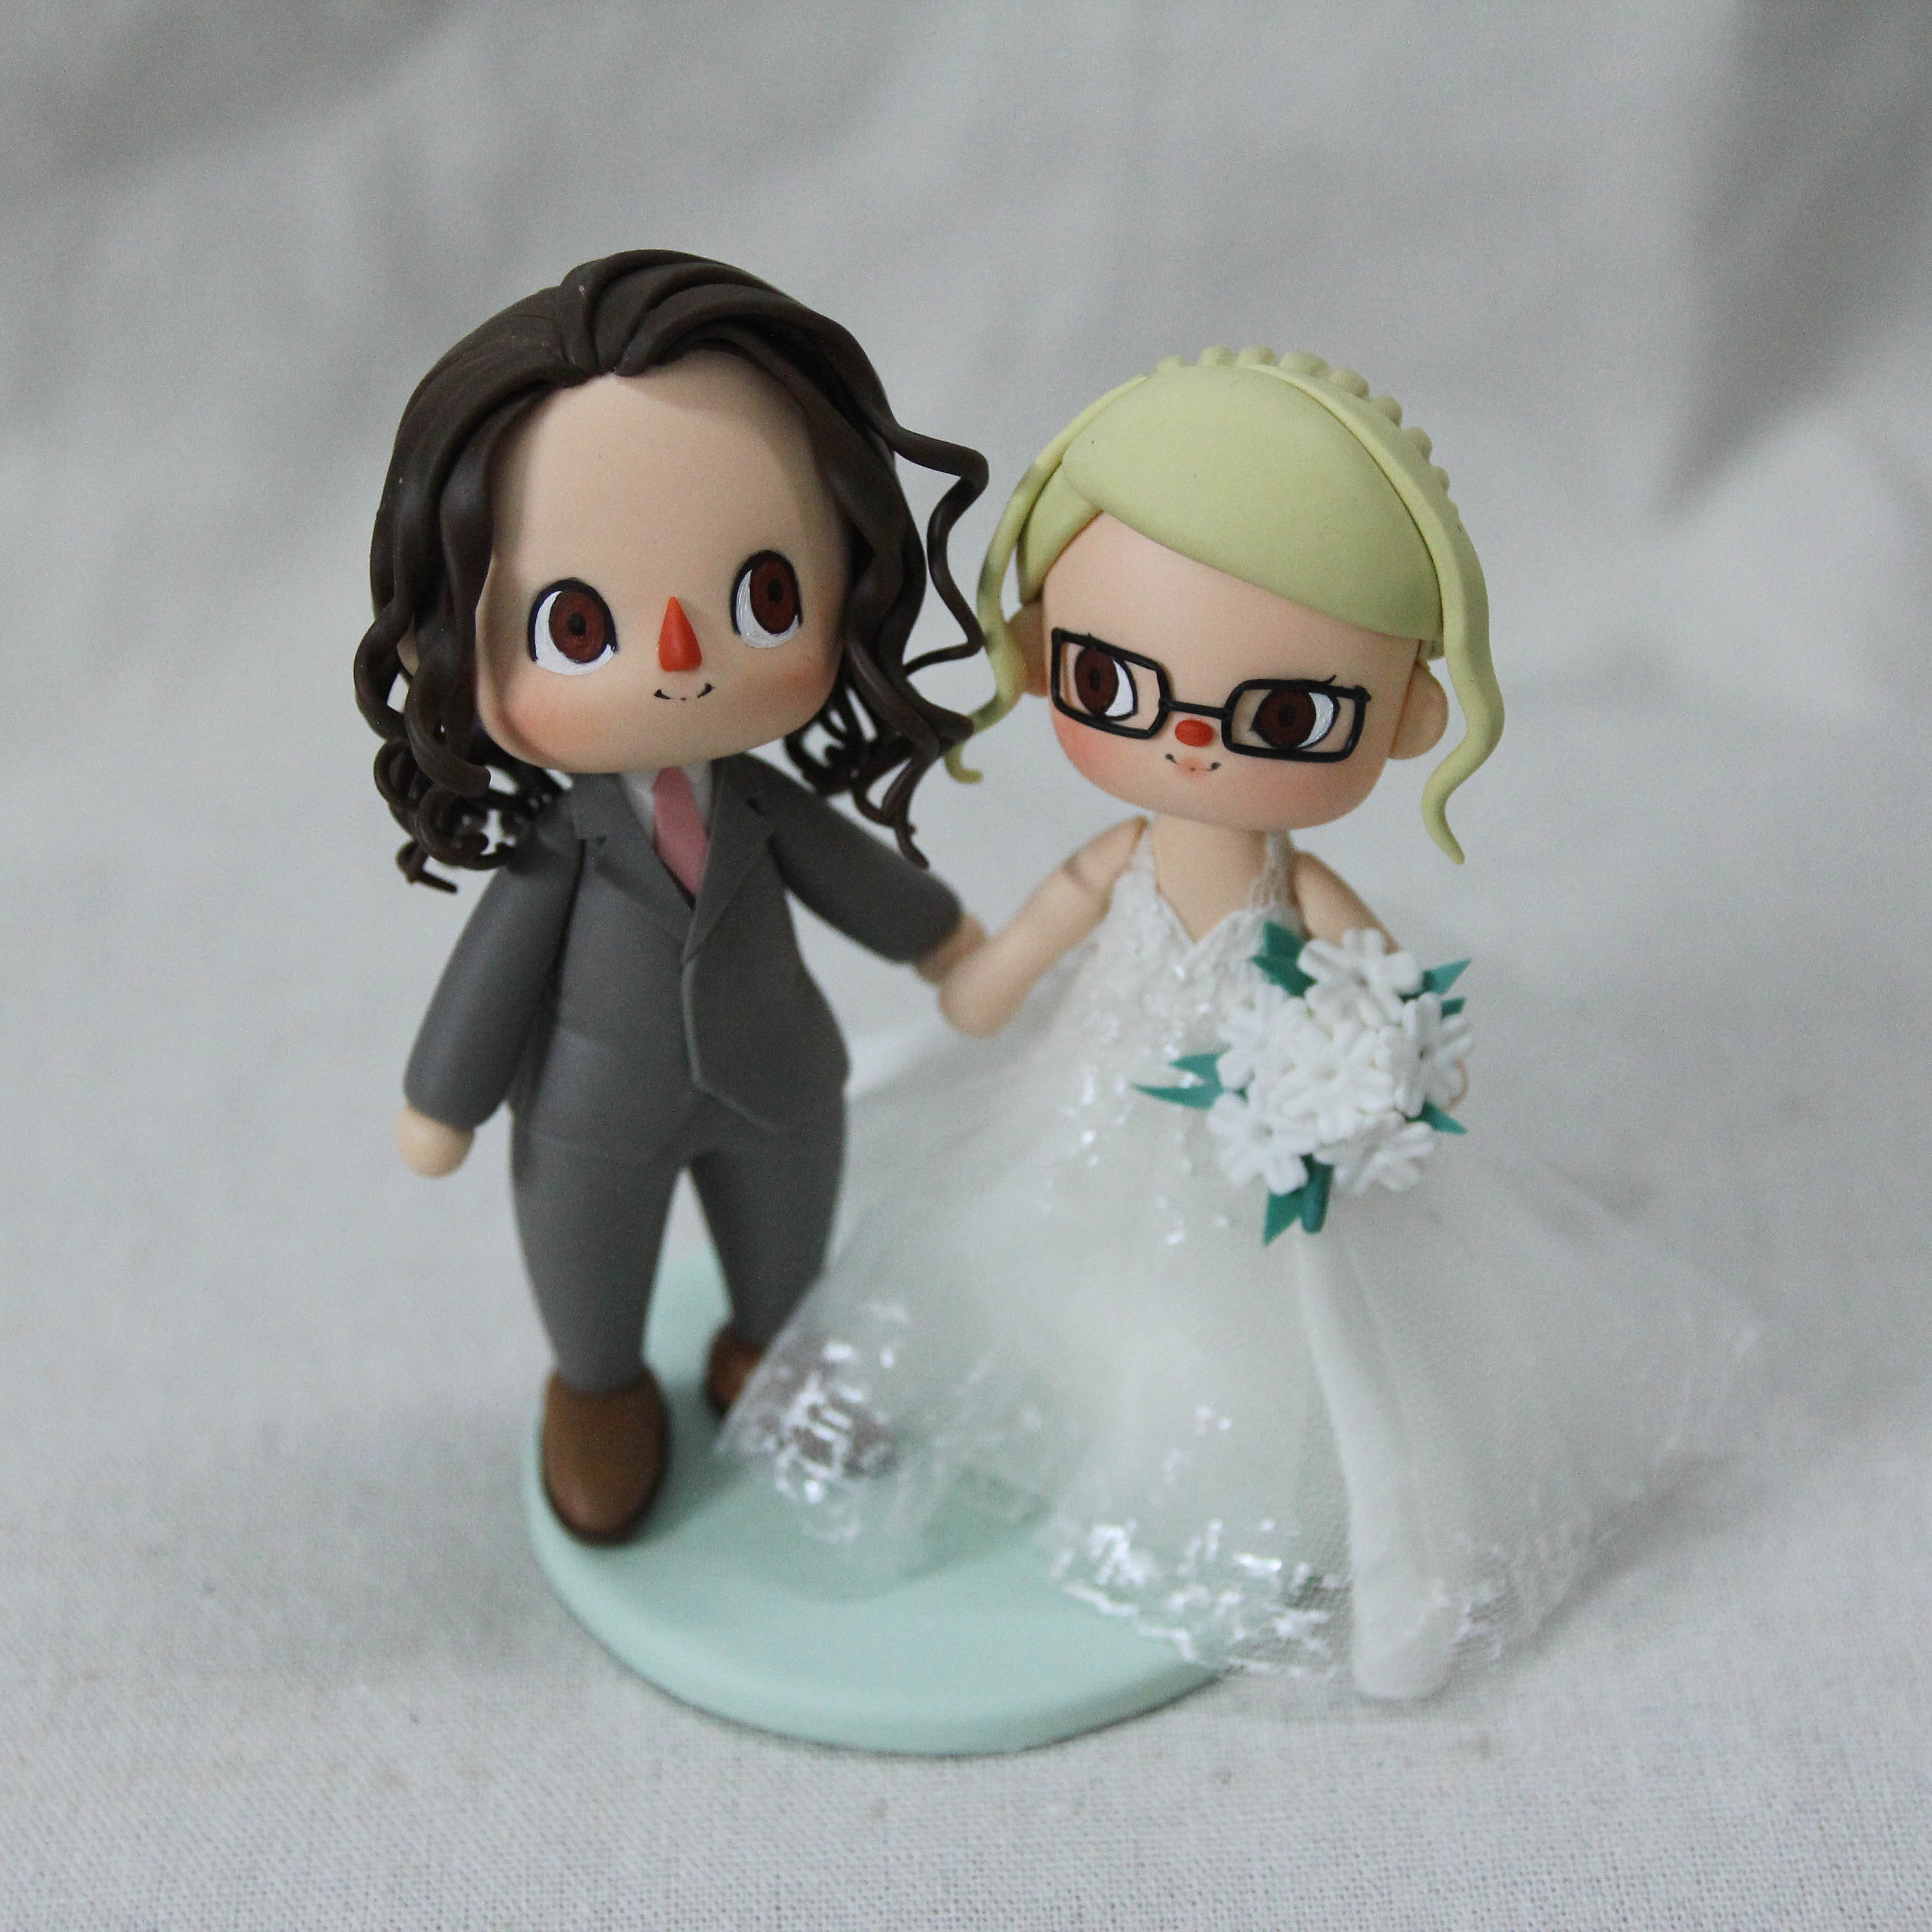 Villagers Wedding Cake Topper, Animal Crossing inspired Wedding, Anniversary Gifts for Gamers